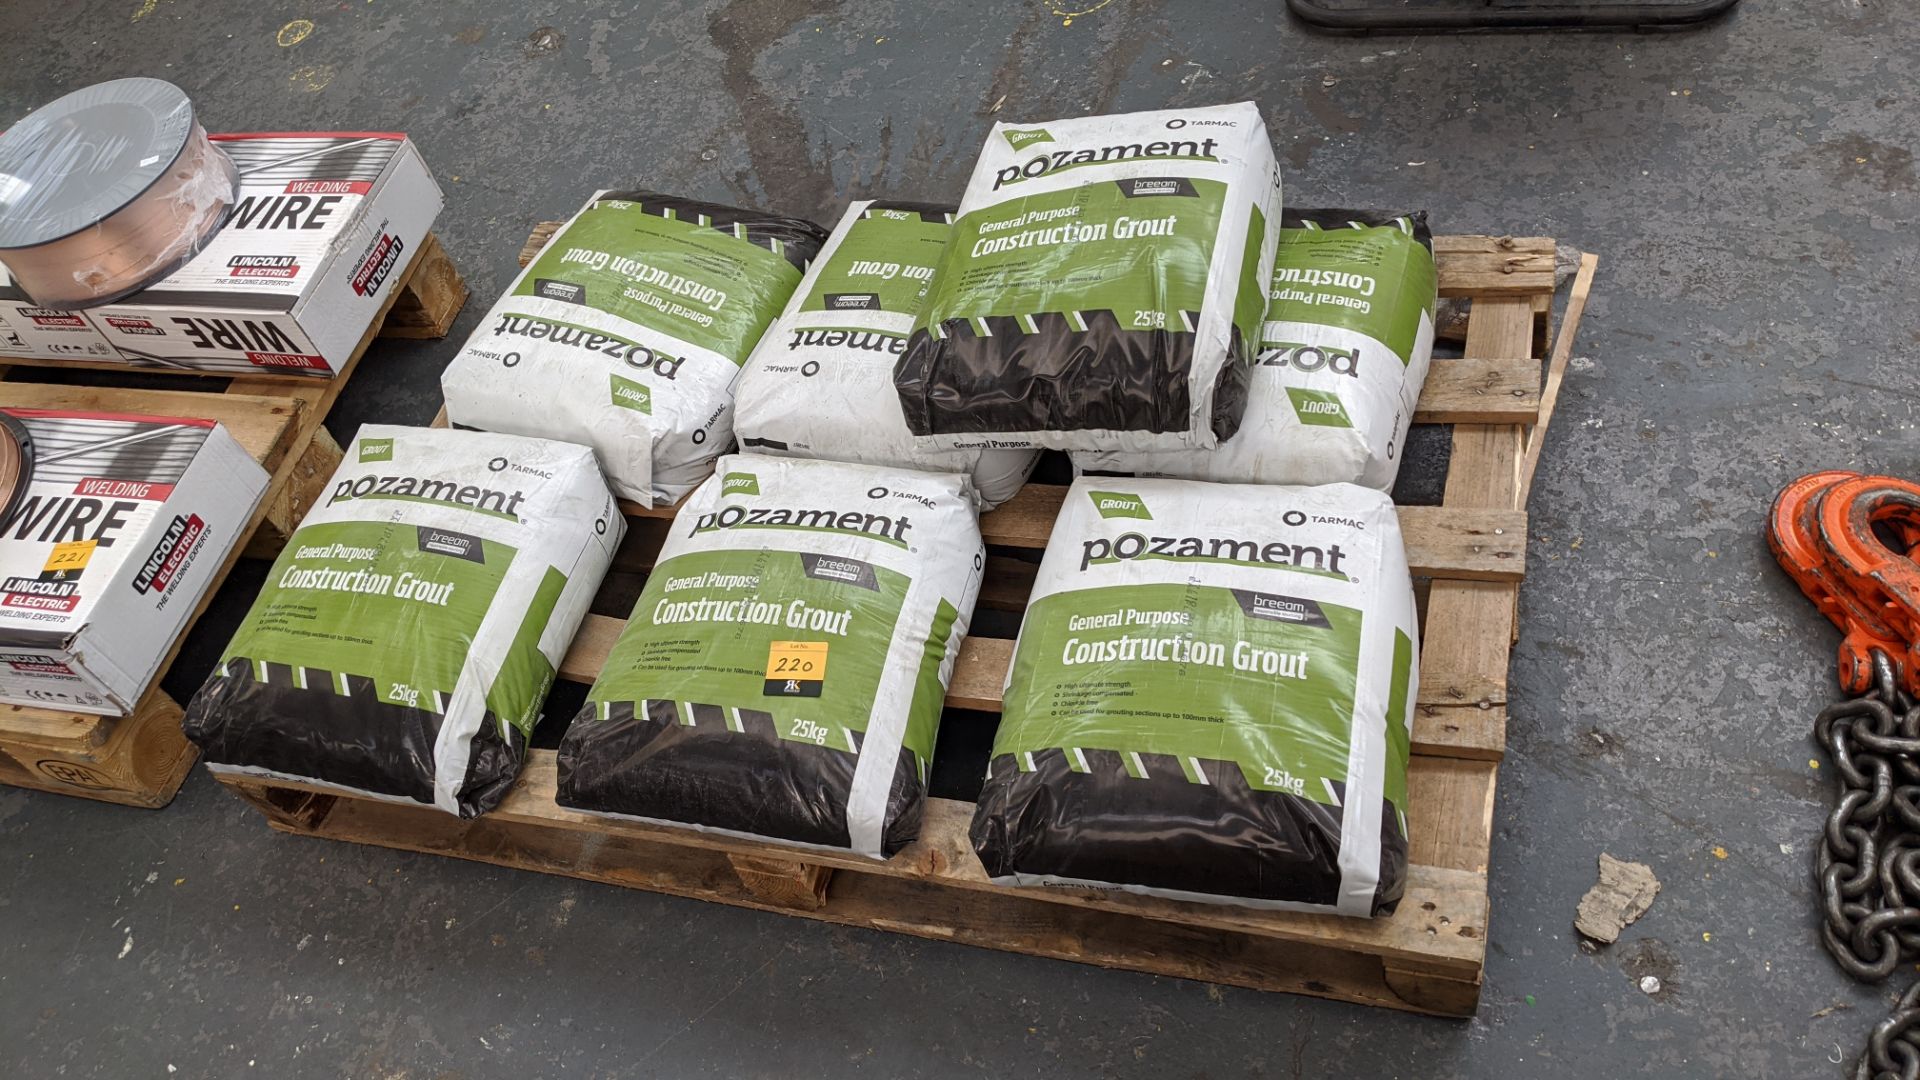 7 off 25kg bags of Pozament general purpose construction grout